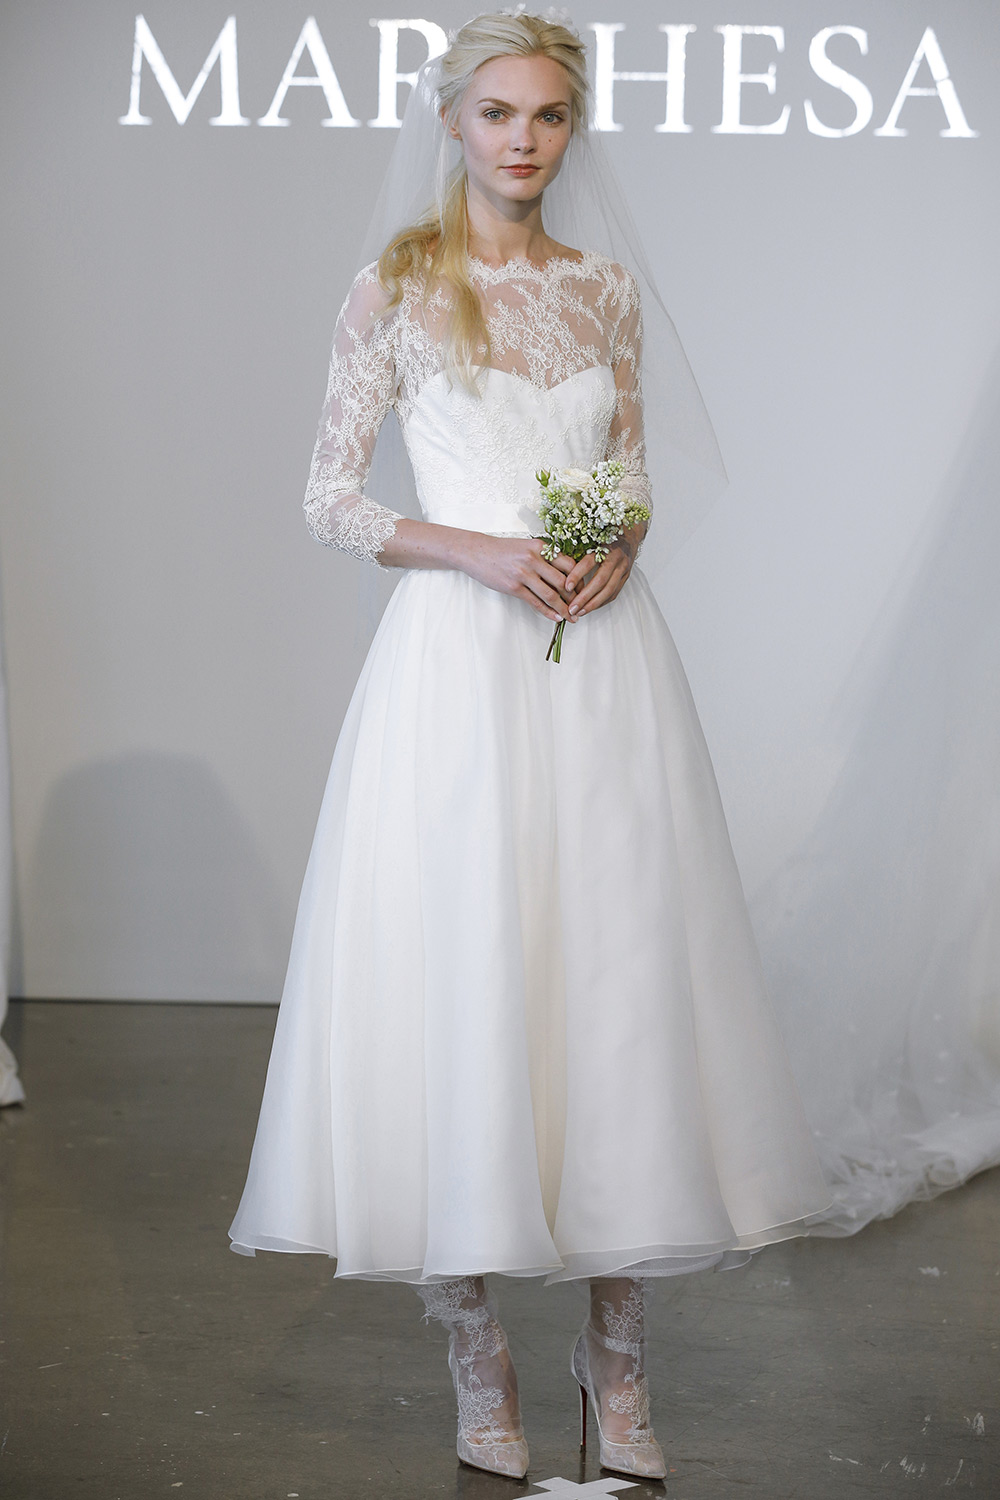 Tea Length Wedding Dress from Marchesa's Spring 2015 Bridal Collection